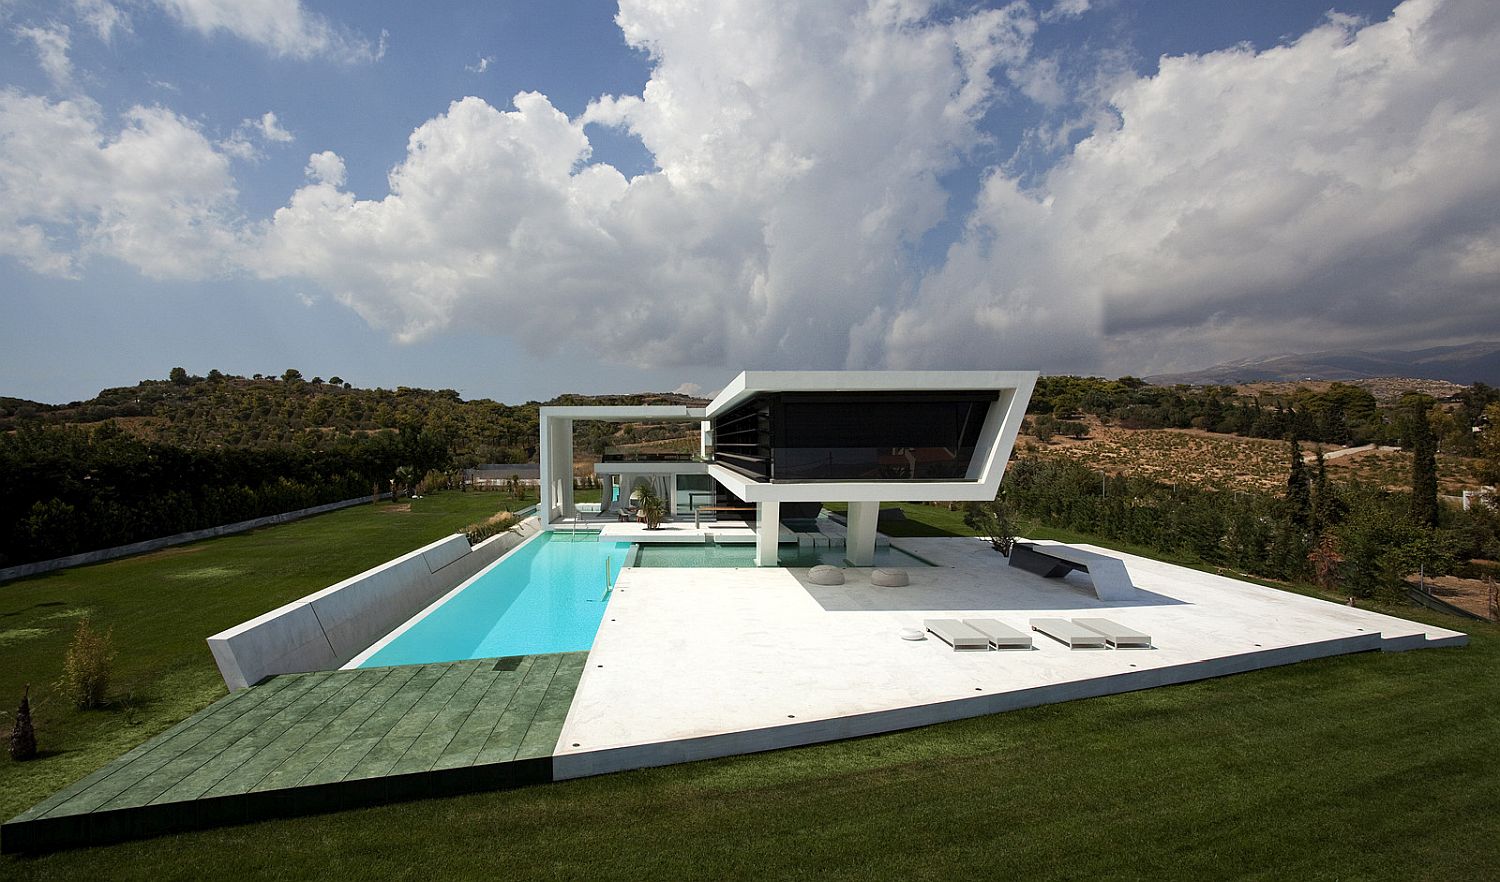 Sailing-plays-a-big-role-in-the-overall-design-of-this-gorgeous-modern-house